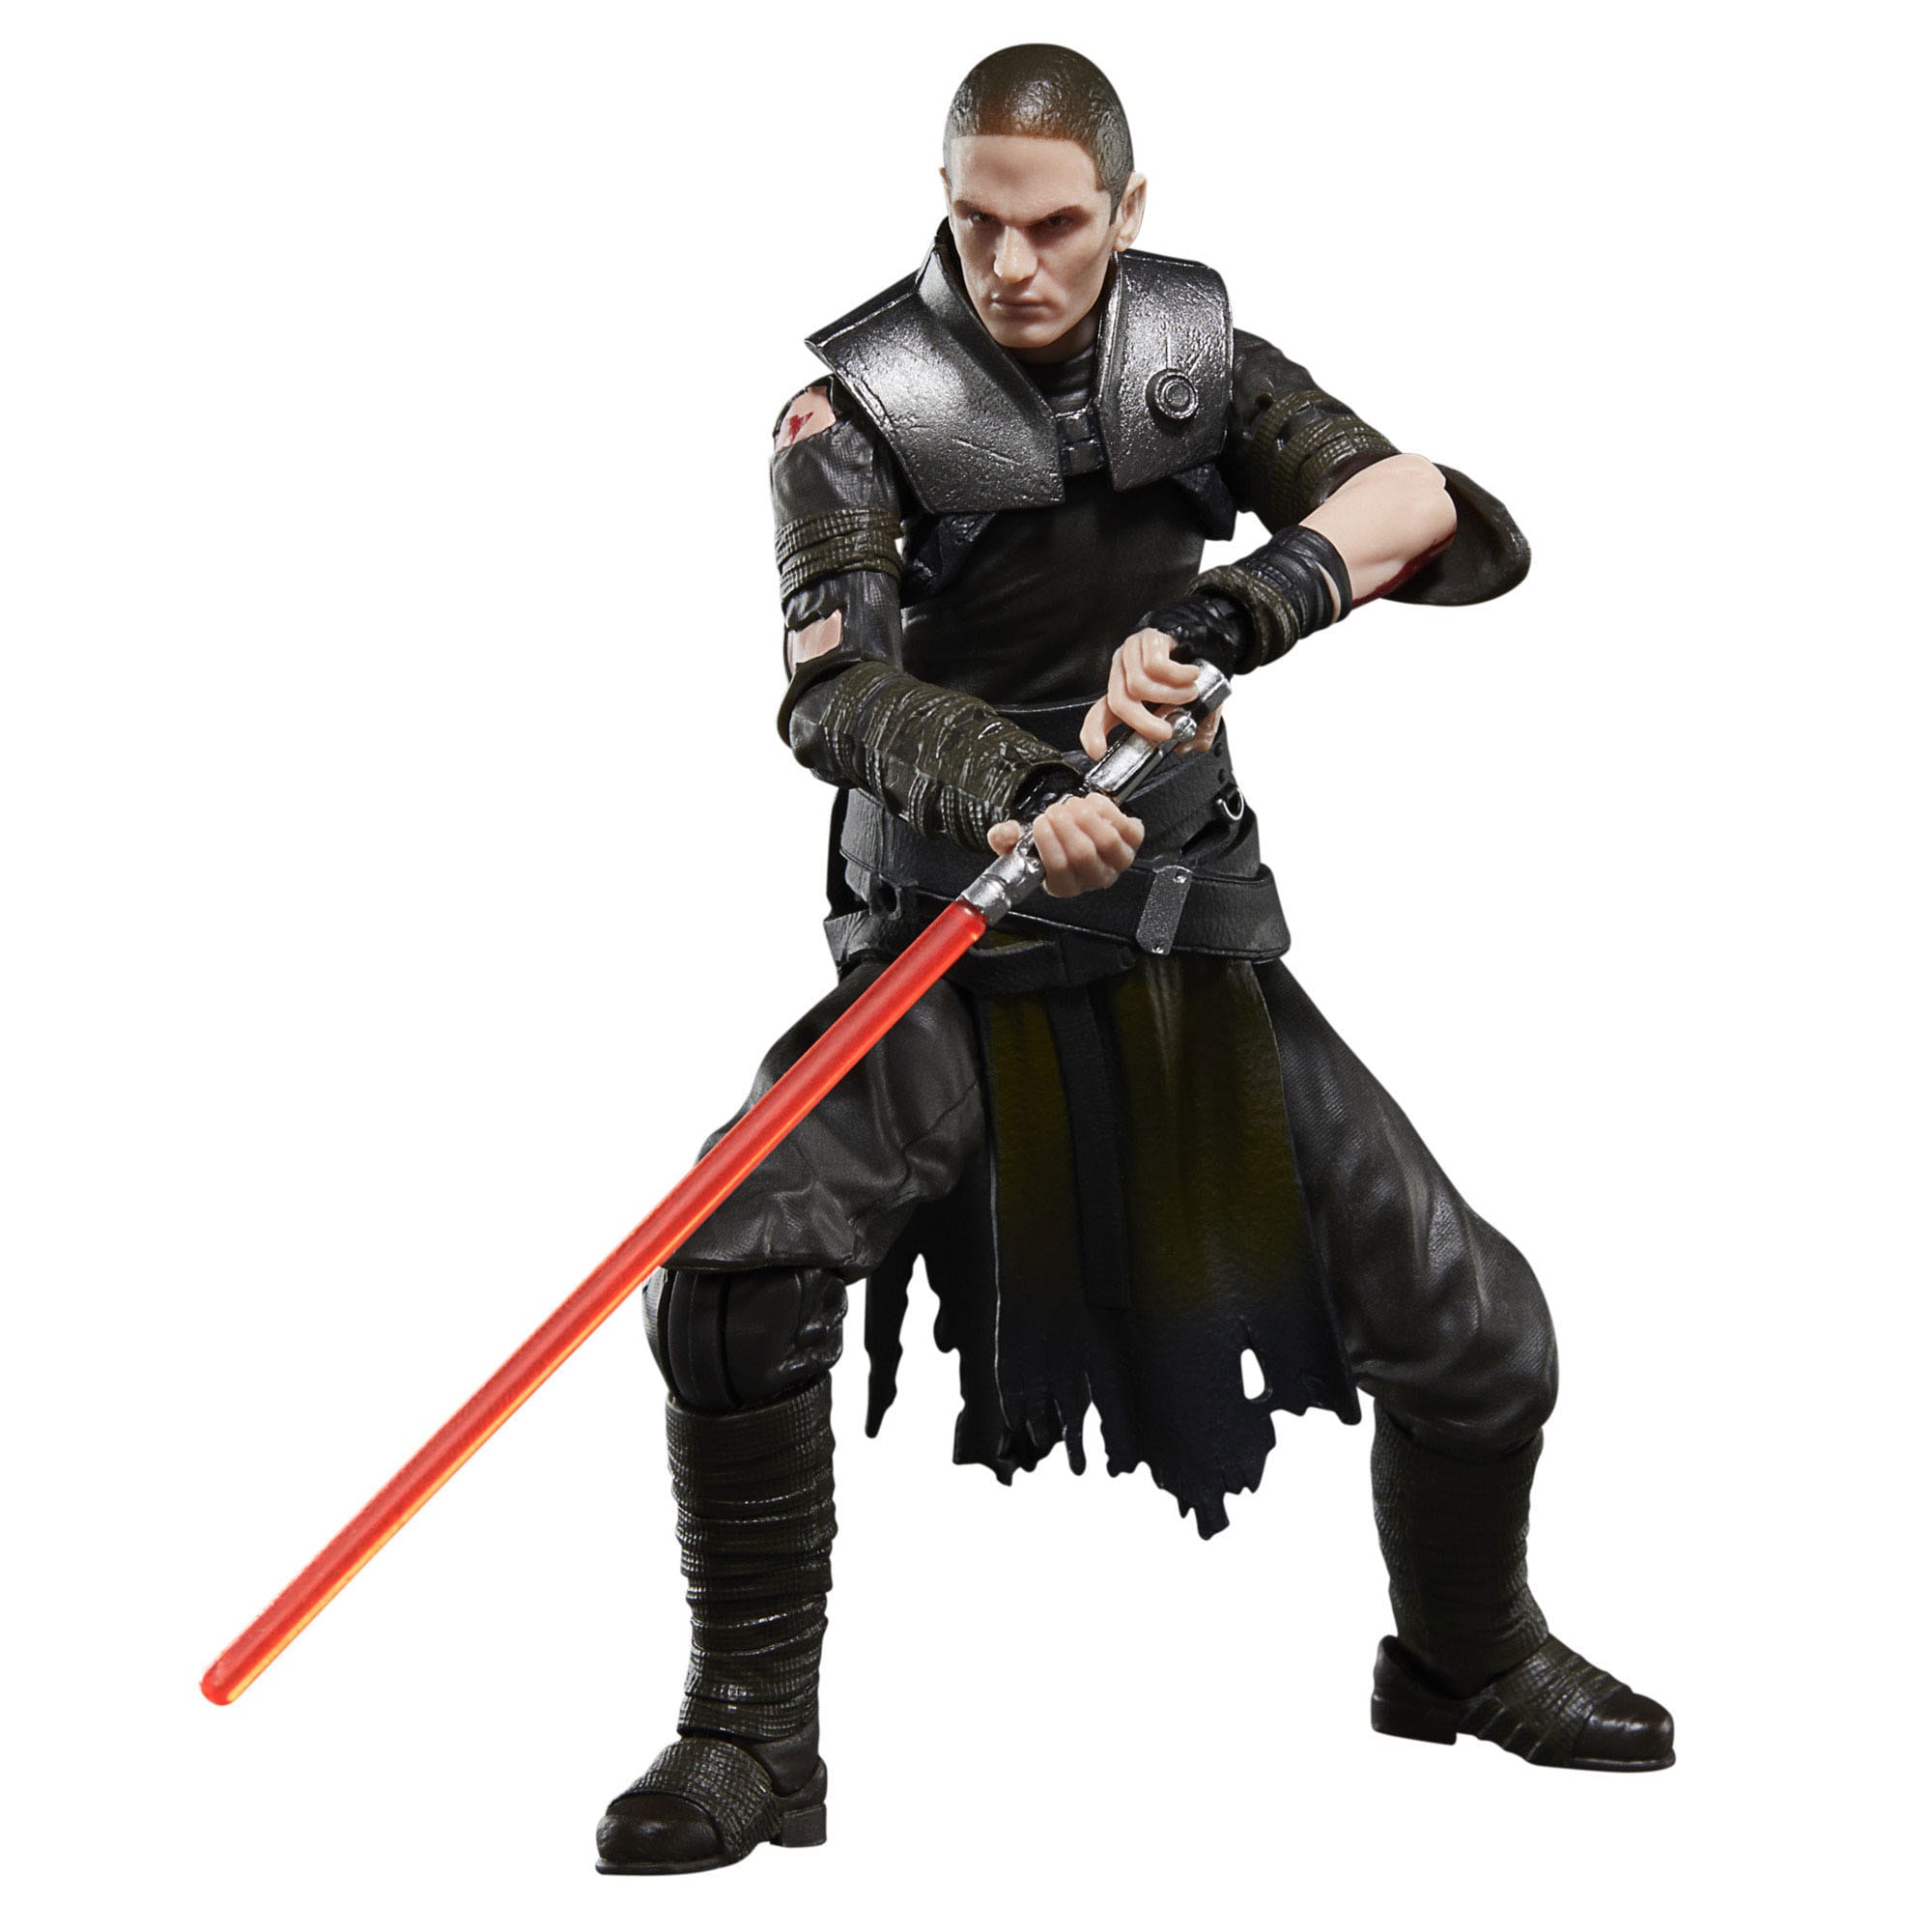 Star Wars: The Force Unleashed Black Series Gaming Greats Actionfigur Starkiller 15 cm HASF7034 5010996142061